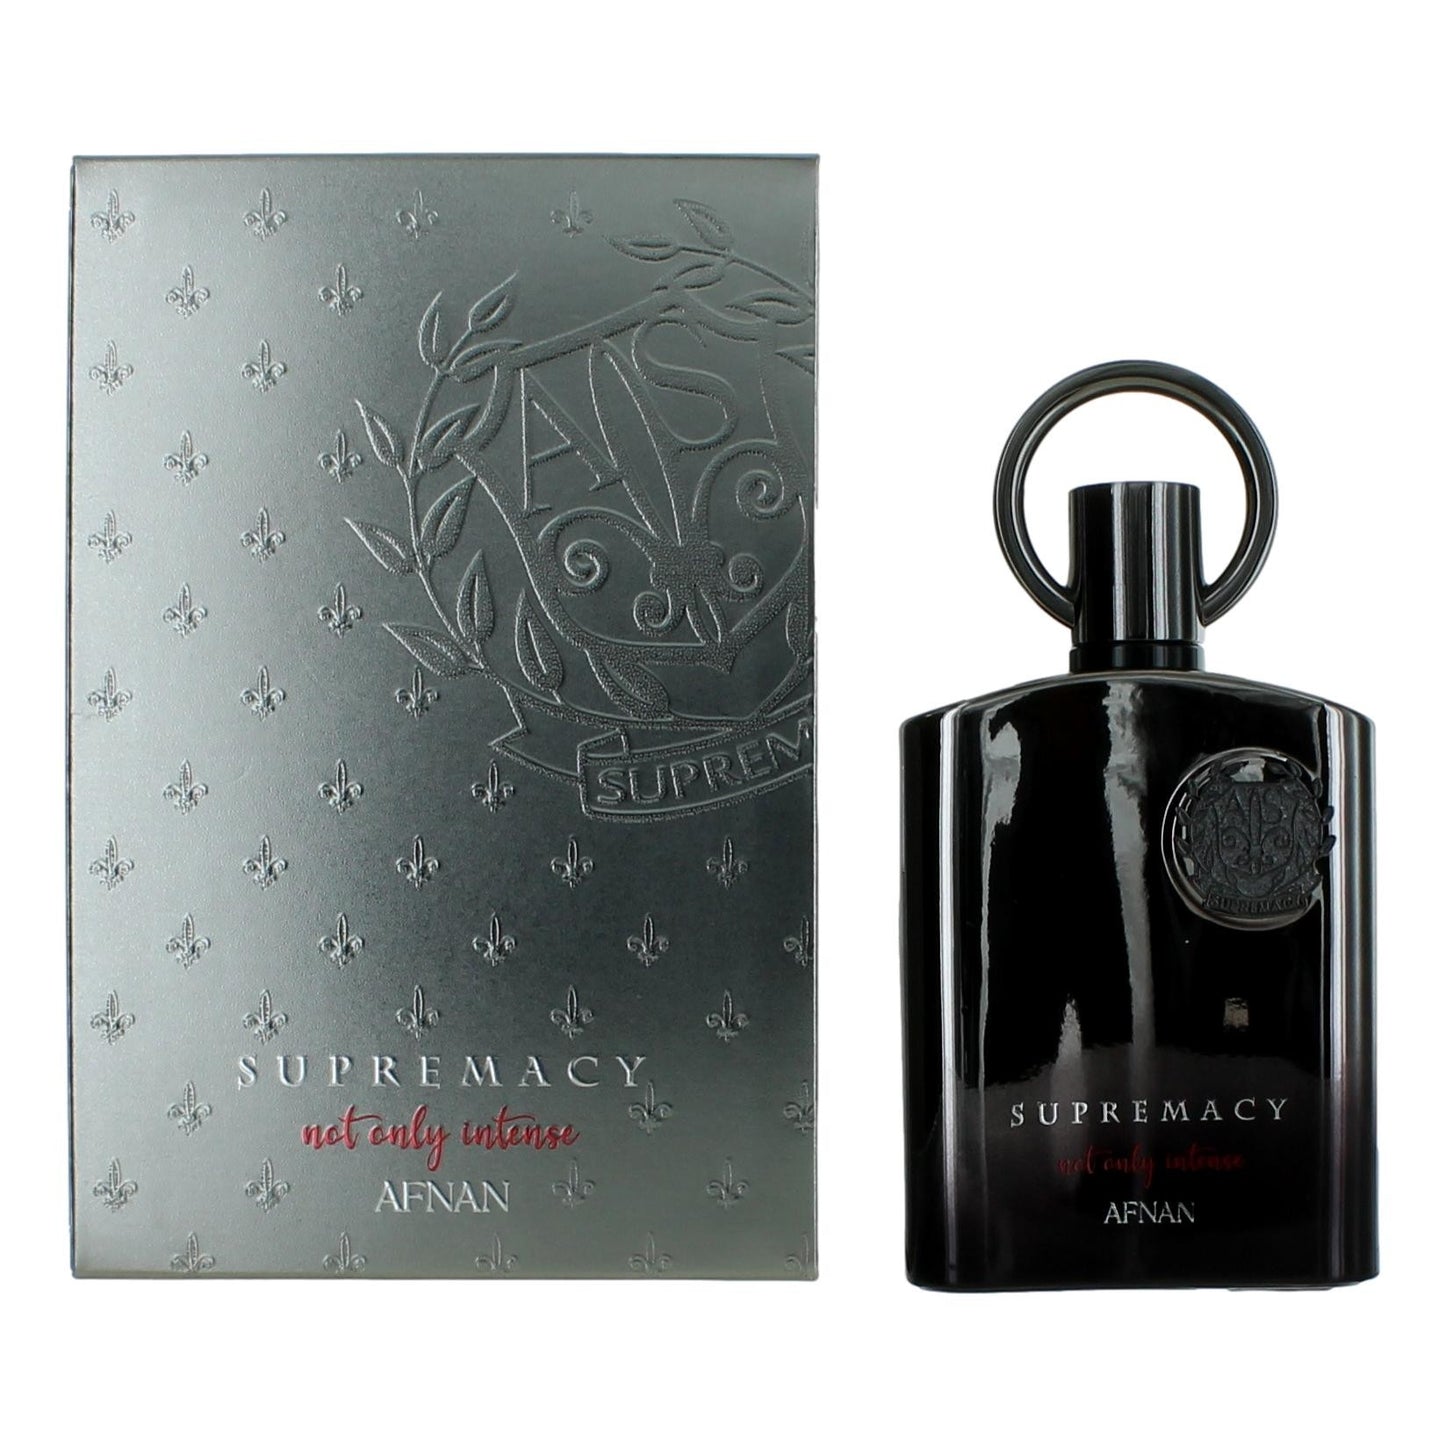 Supremacy Not Only Intense by Afnan, 3.4 oz EDP Spray for Men